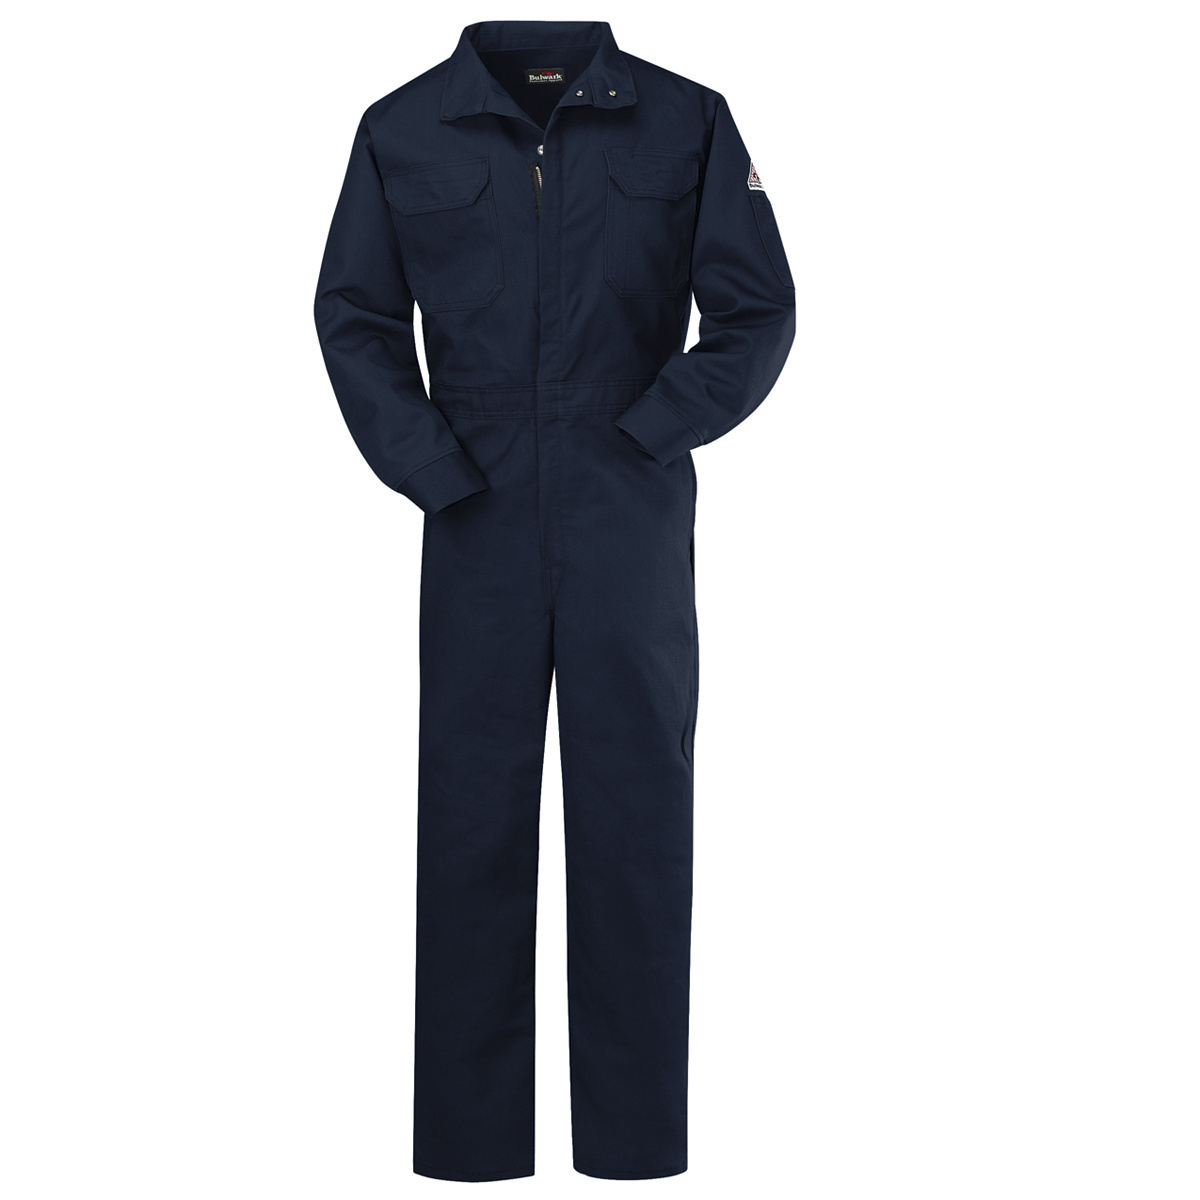 Bulwark® 42 Regular Navy Blue Westex Ultrasoft®/Cotton/Nylon Flame Resistant Coveralls With Zipper Front Closure